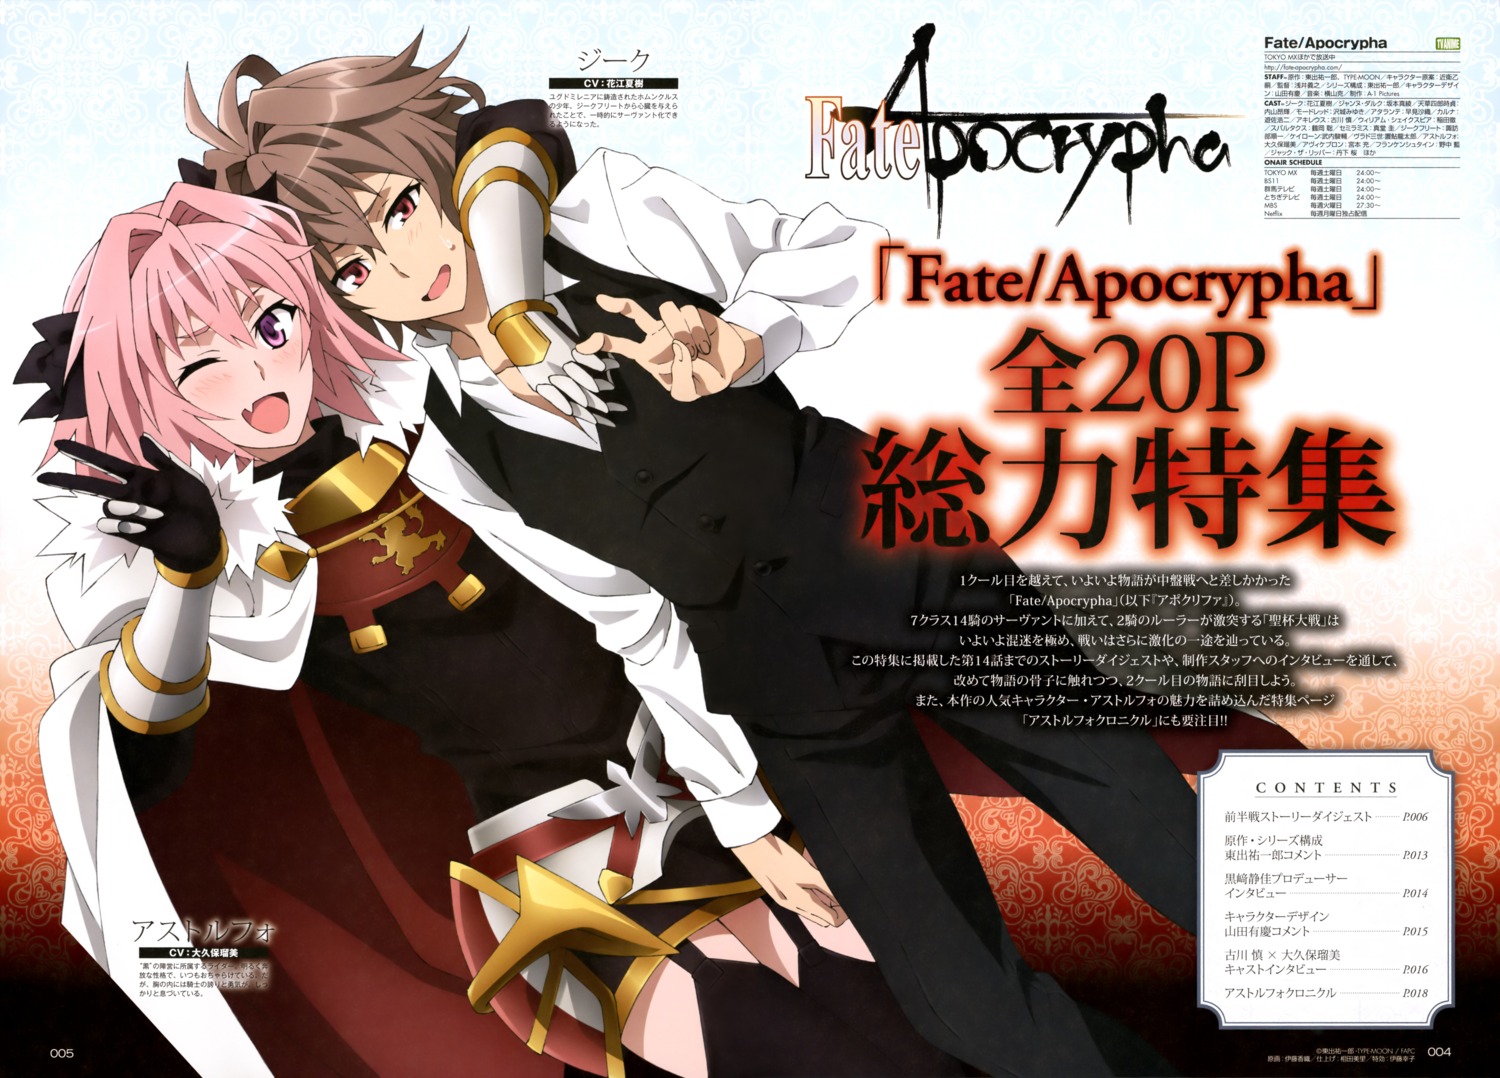 Itou Kaori Fate Apocrypha Fate Stay Night Astolfo Fate Sieg Fate Apocrypha Armor Index Page Stockings Thighhighs Trap Yande Re